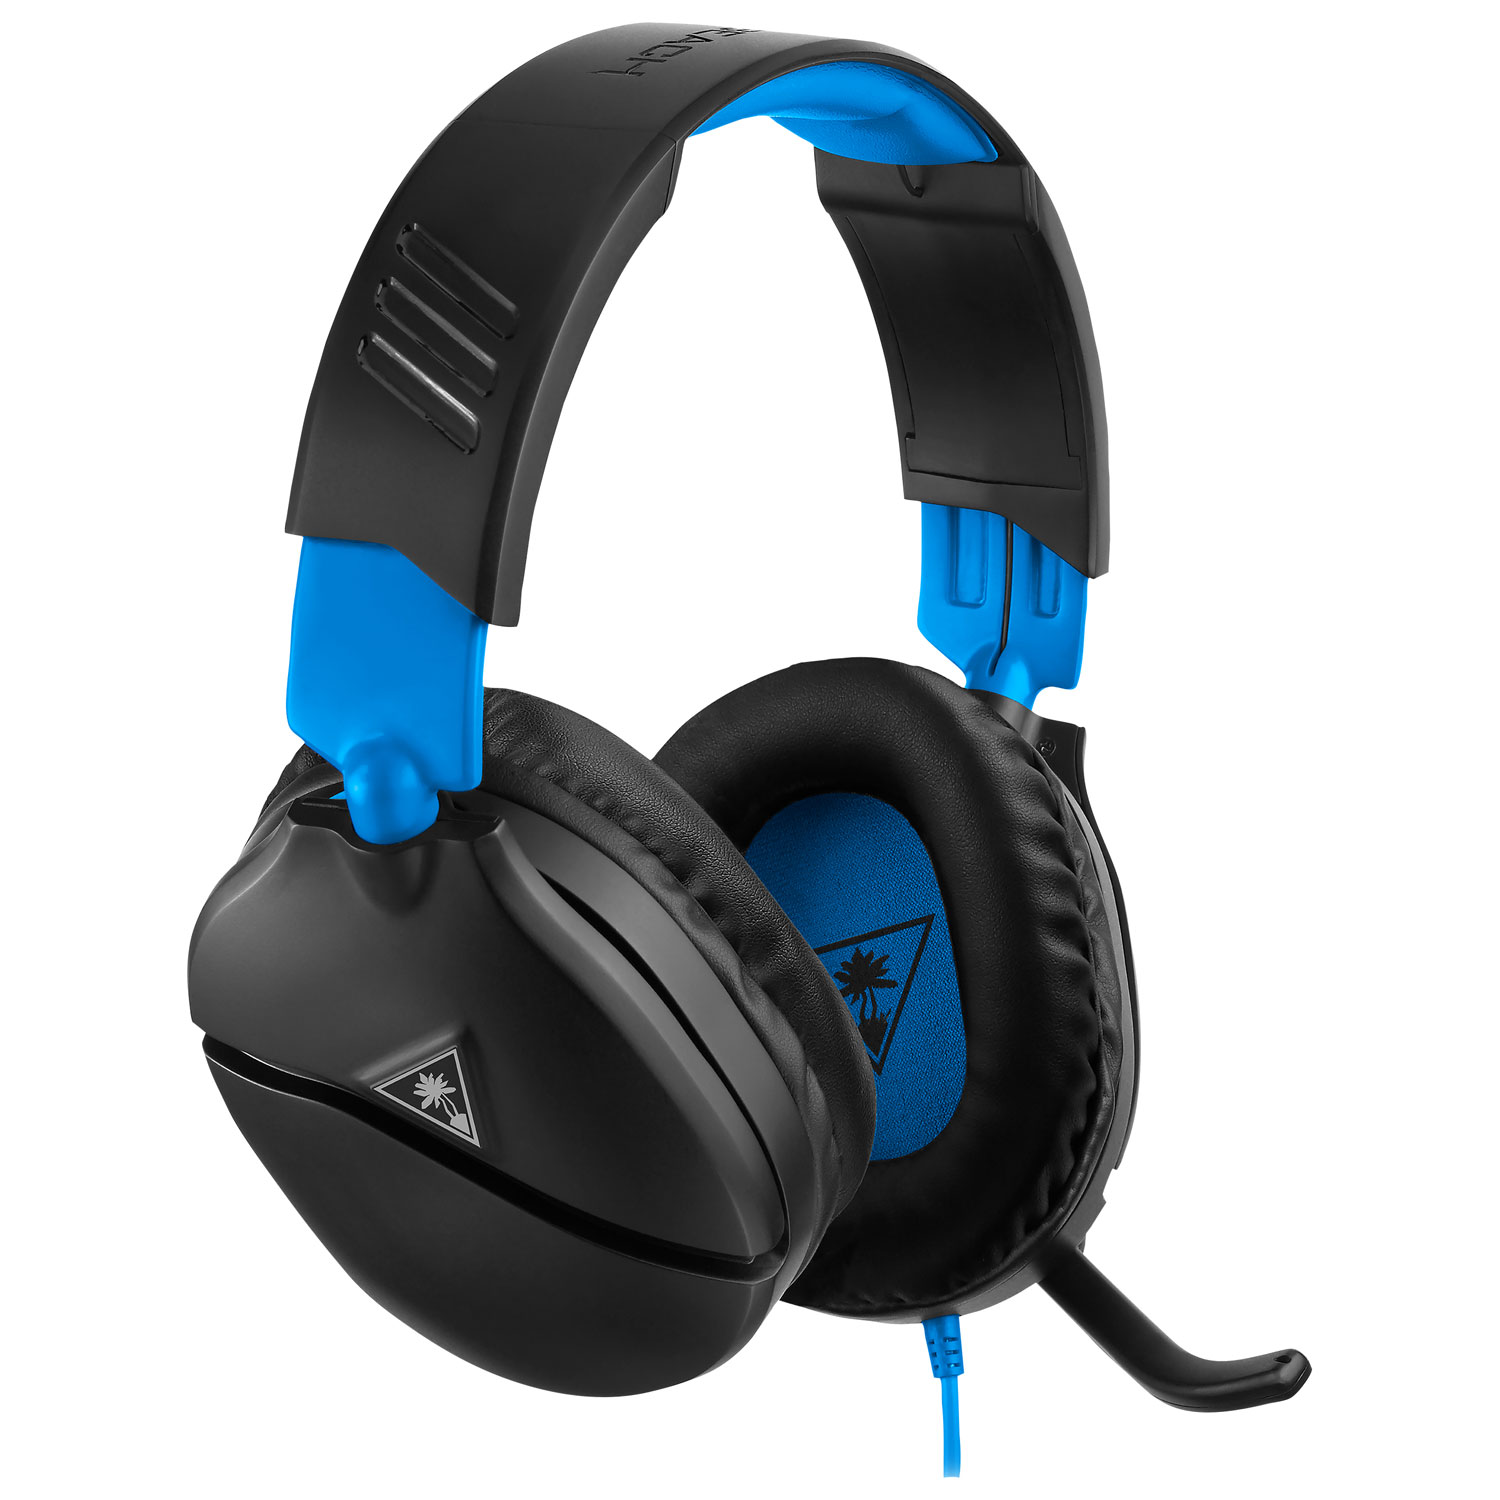 Turtle Beach Ear Force Recon 70 Gaming Headset with Microphone for Playstation 4 - Black